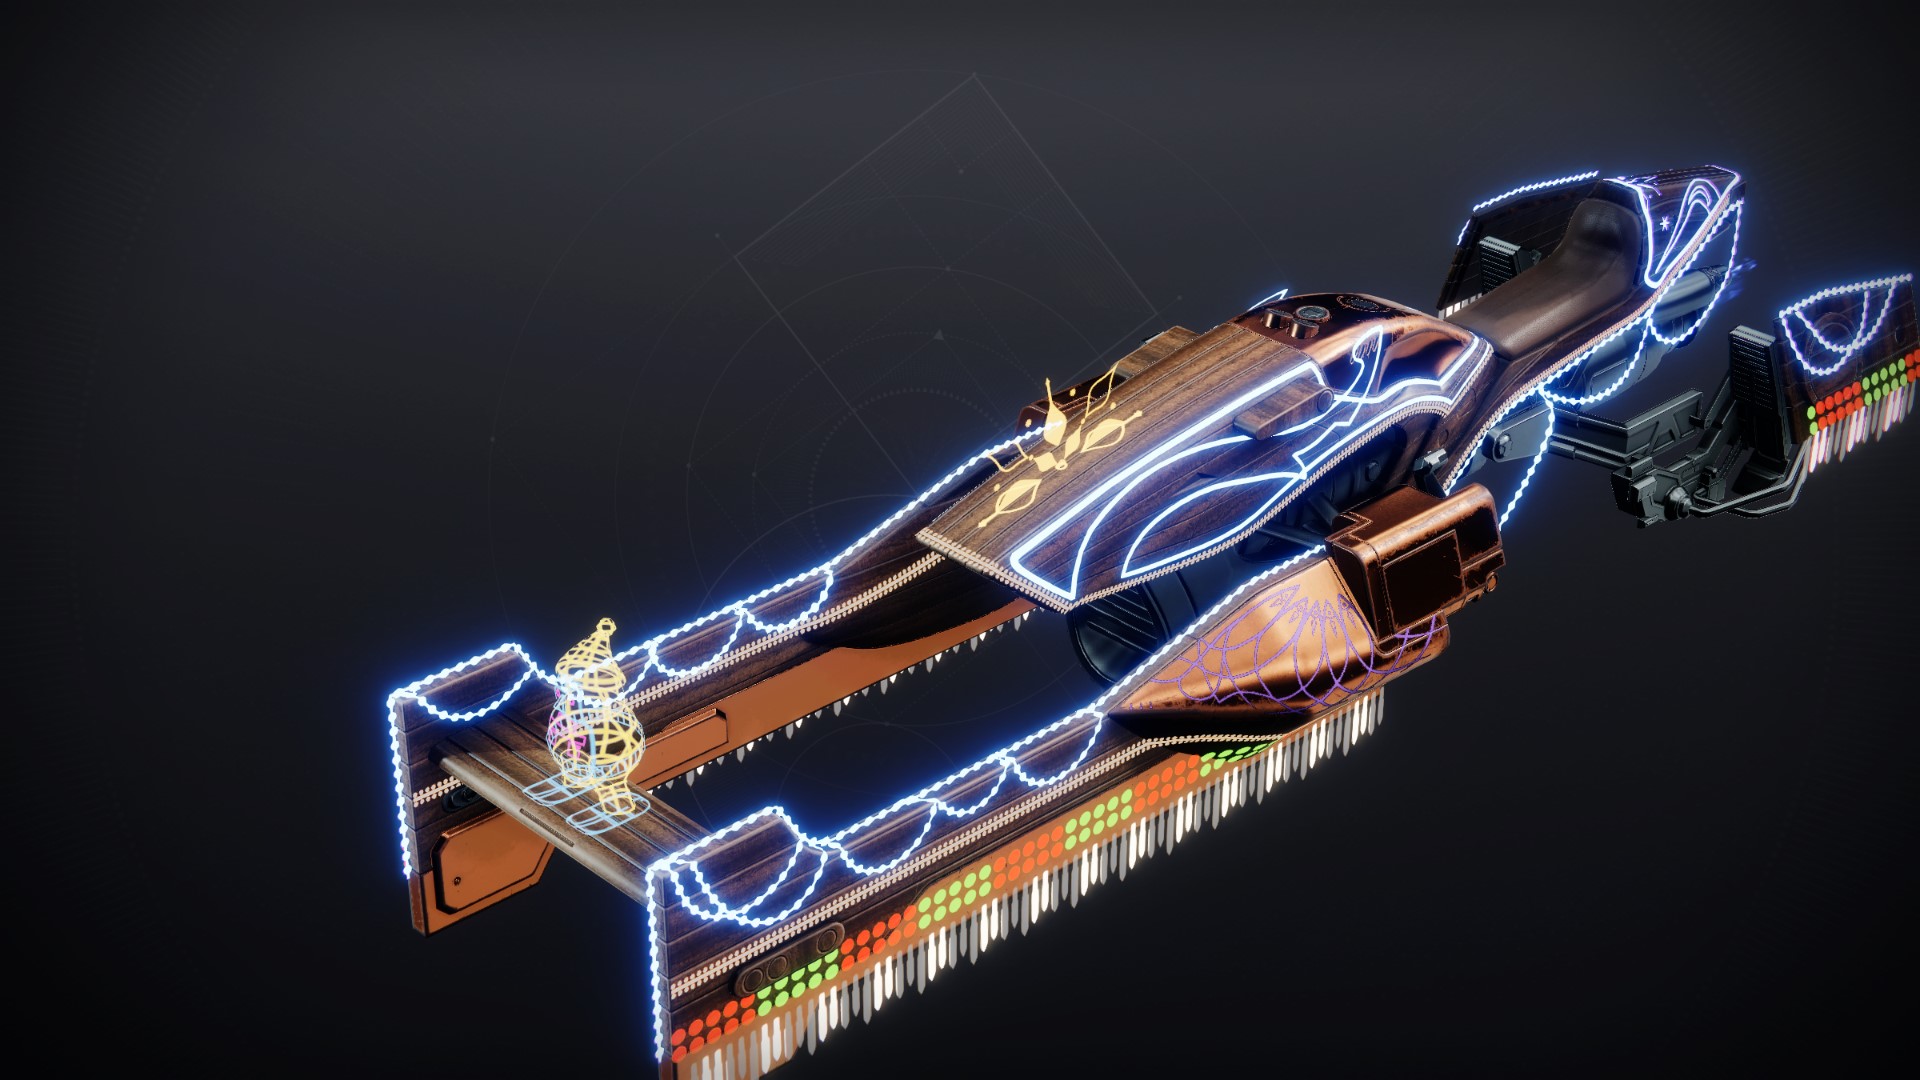 An in-game render of the Cross-EDZ Symphony.